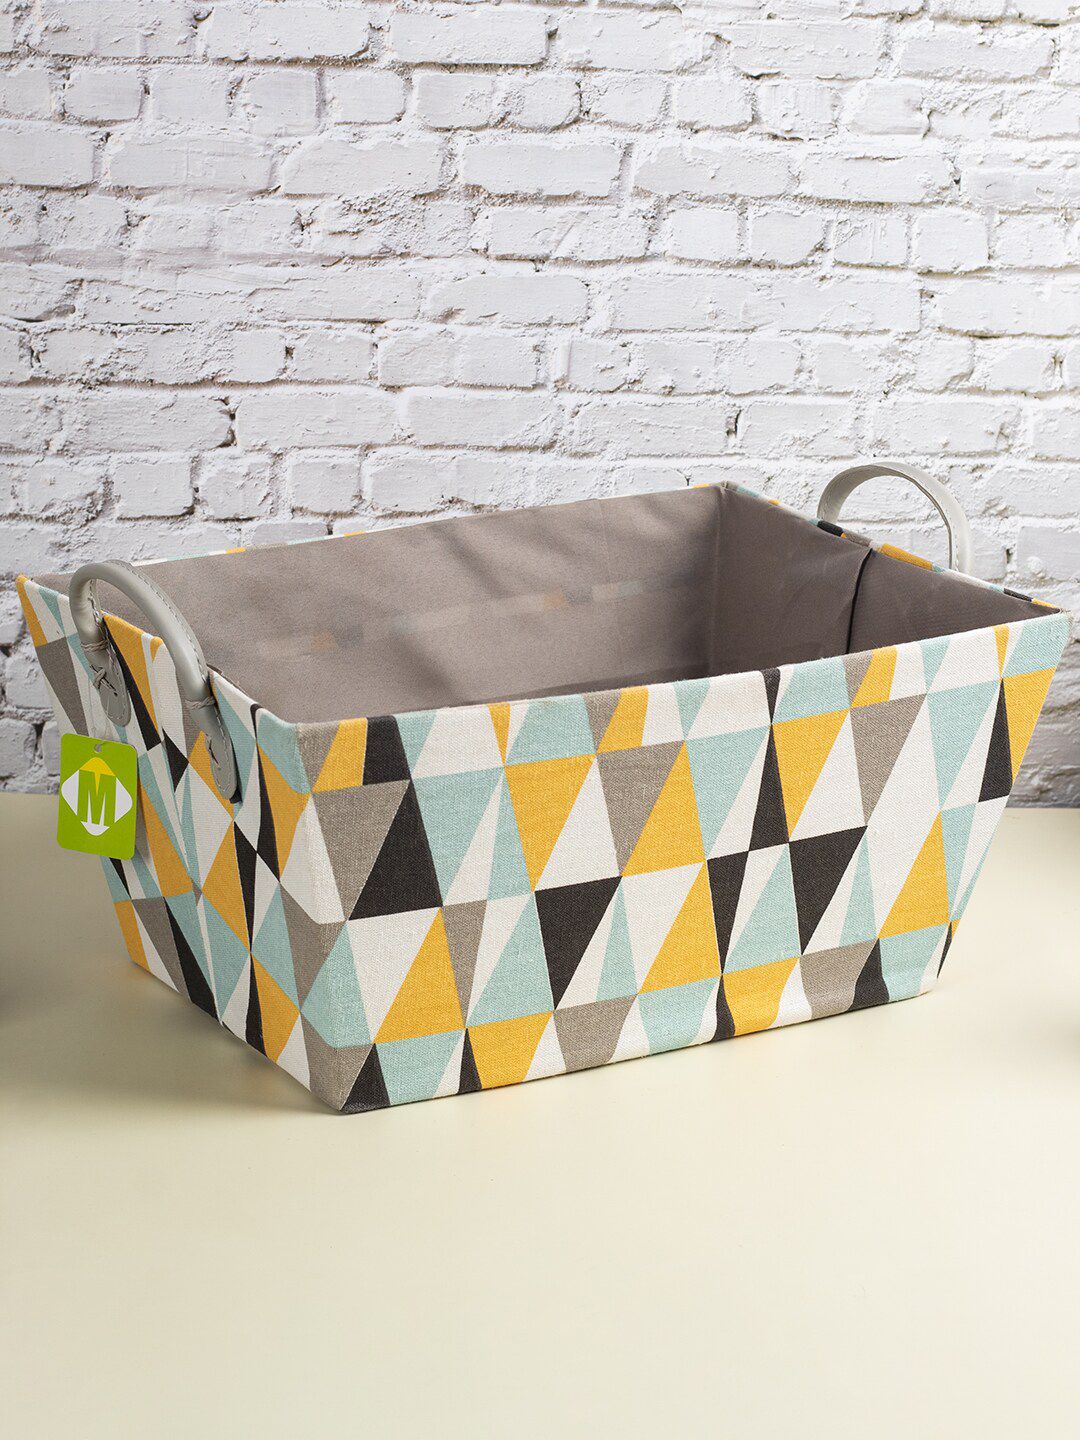 MARKET99 Yellow & White Geometric Canvas Basket Organizer With Handle Price in India